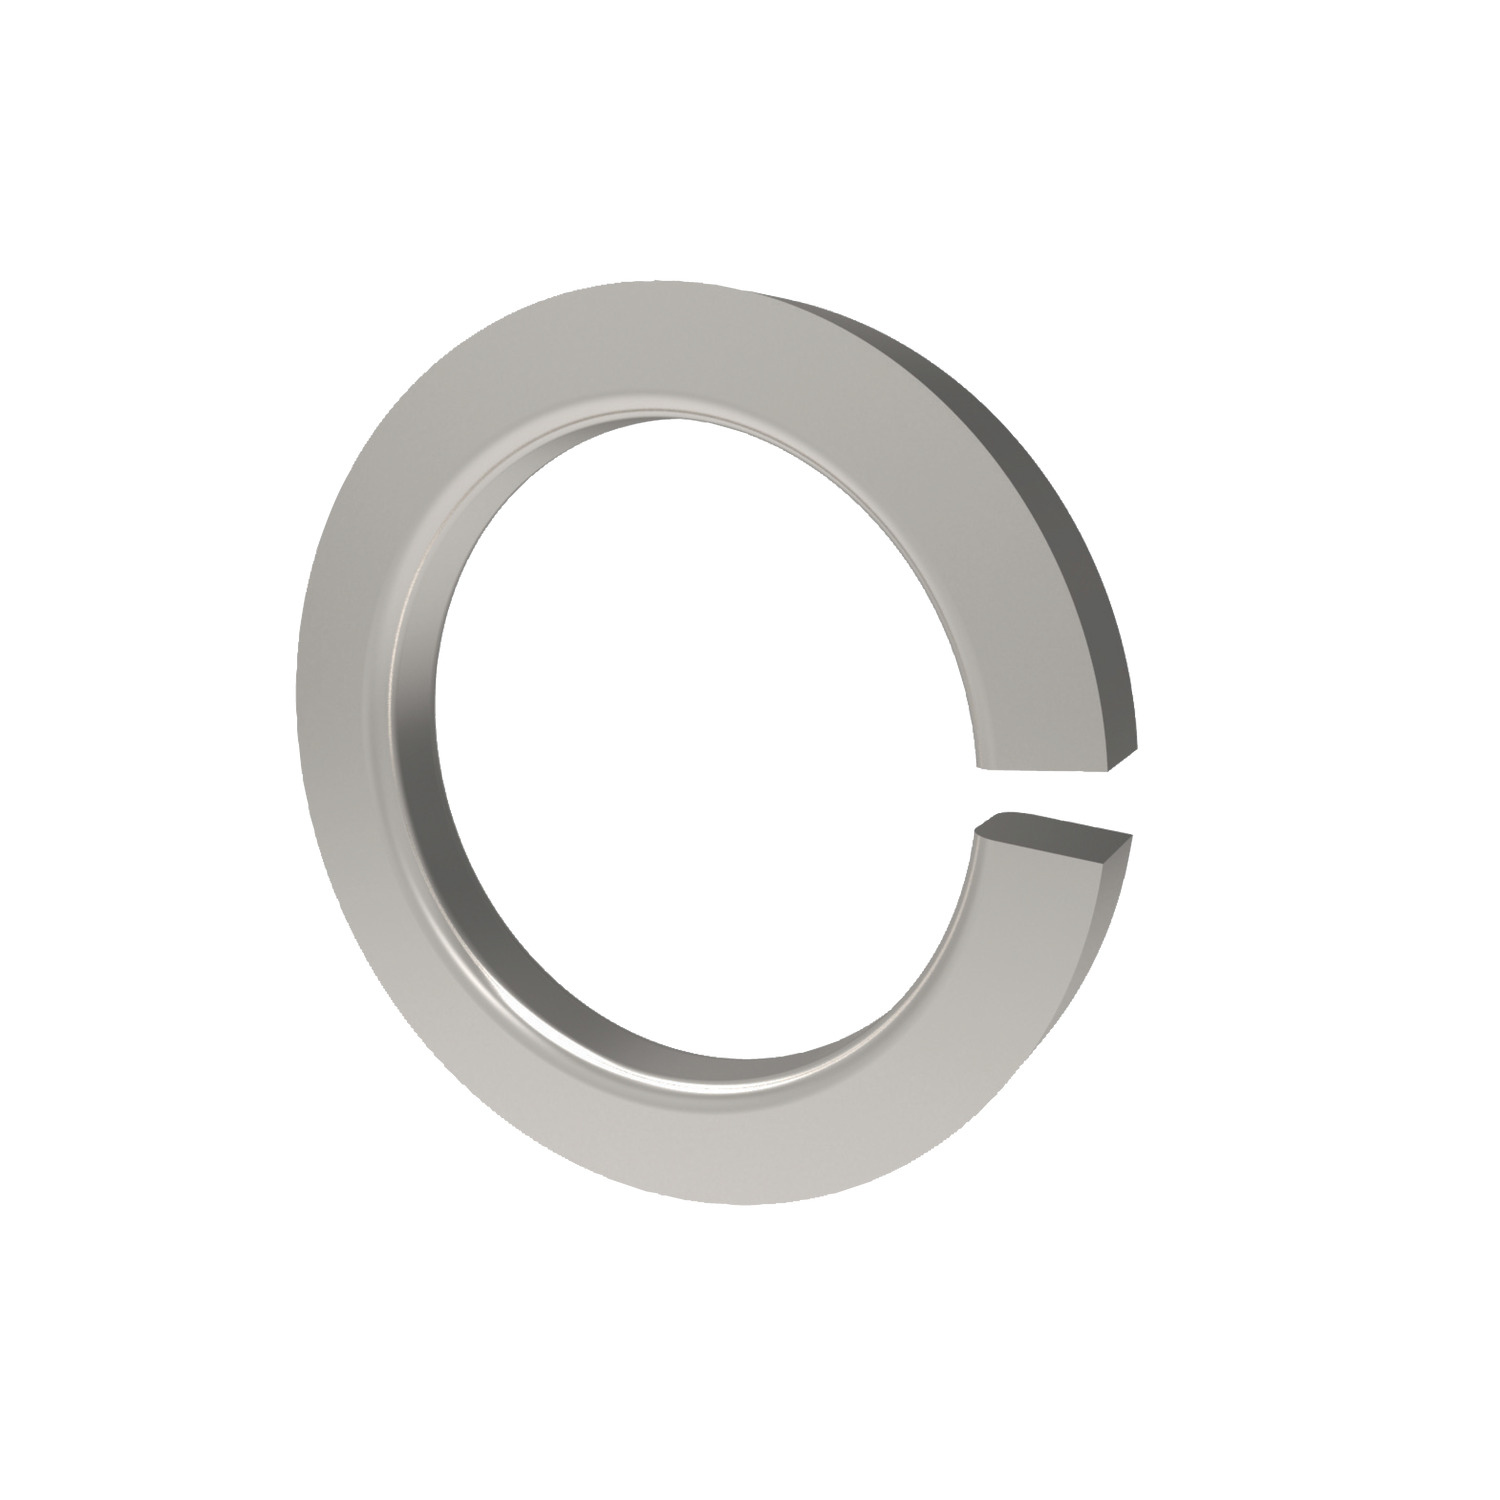 Square Section Washers